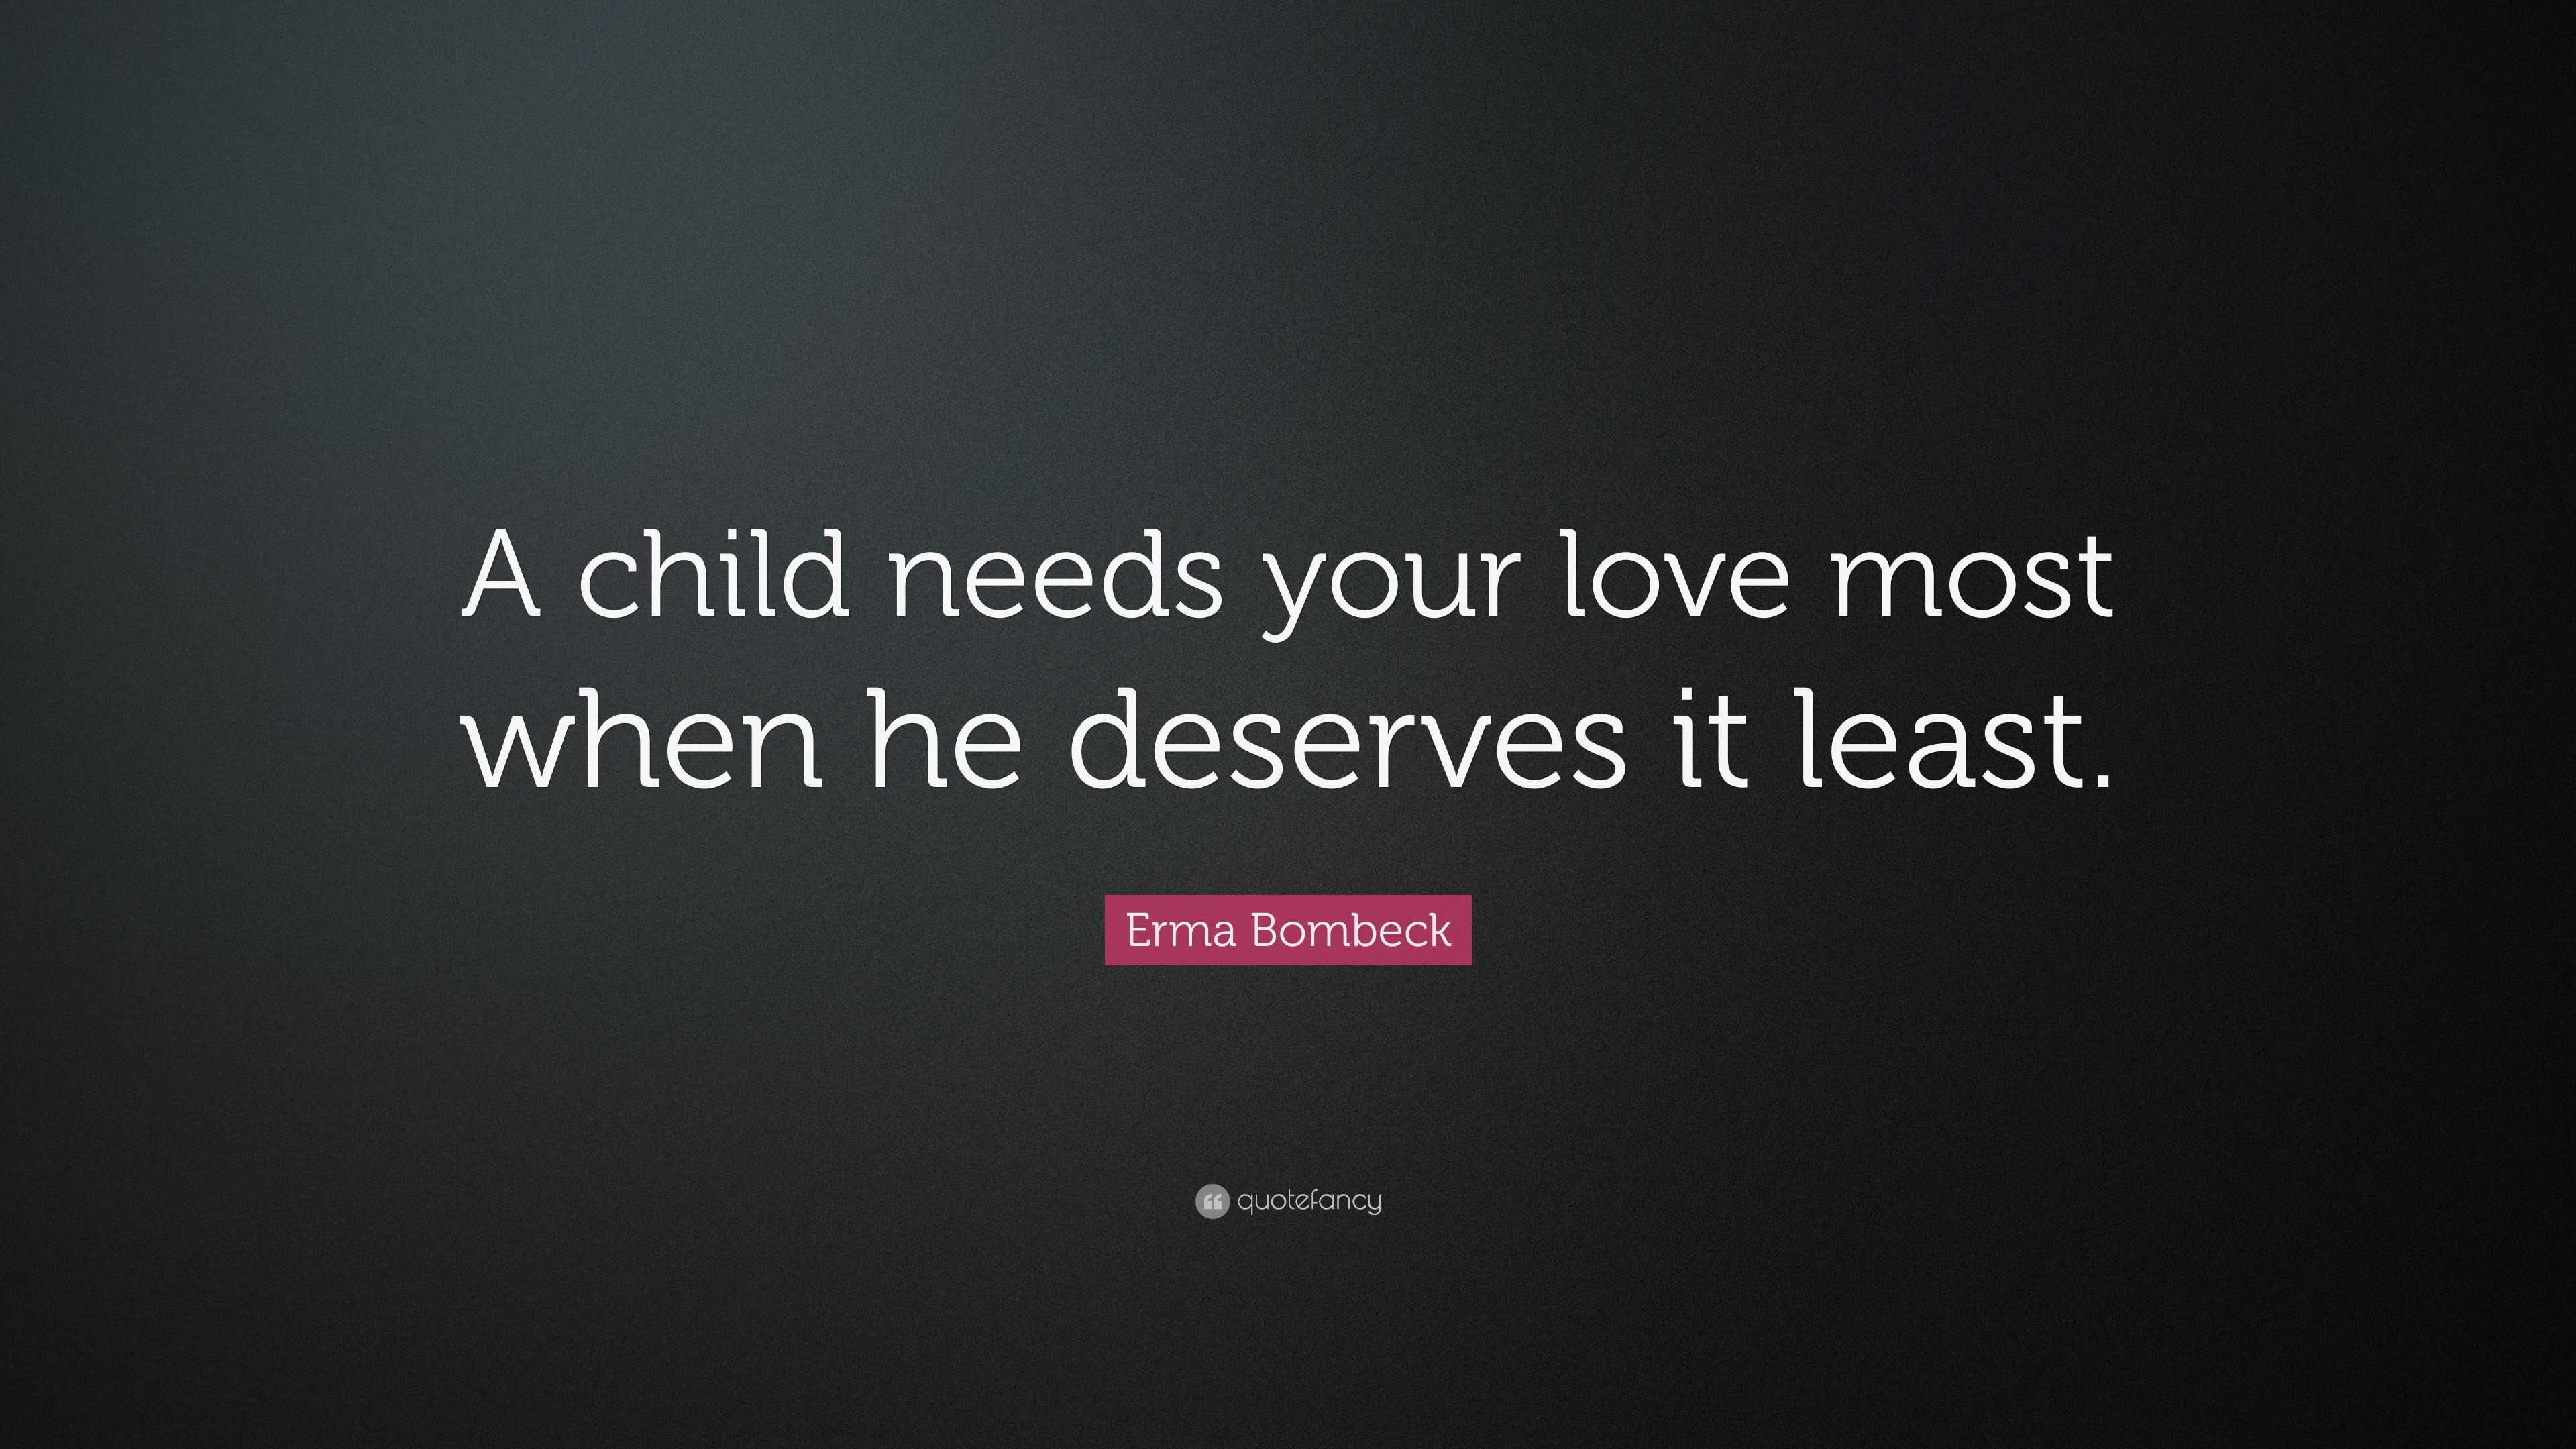 Erma Bombeck Quote: “A child needs your love most when he deserves it ...